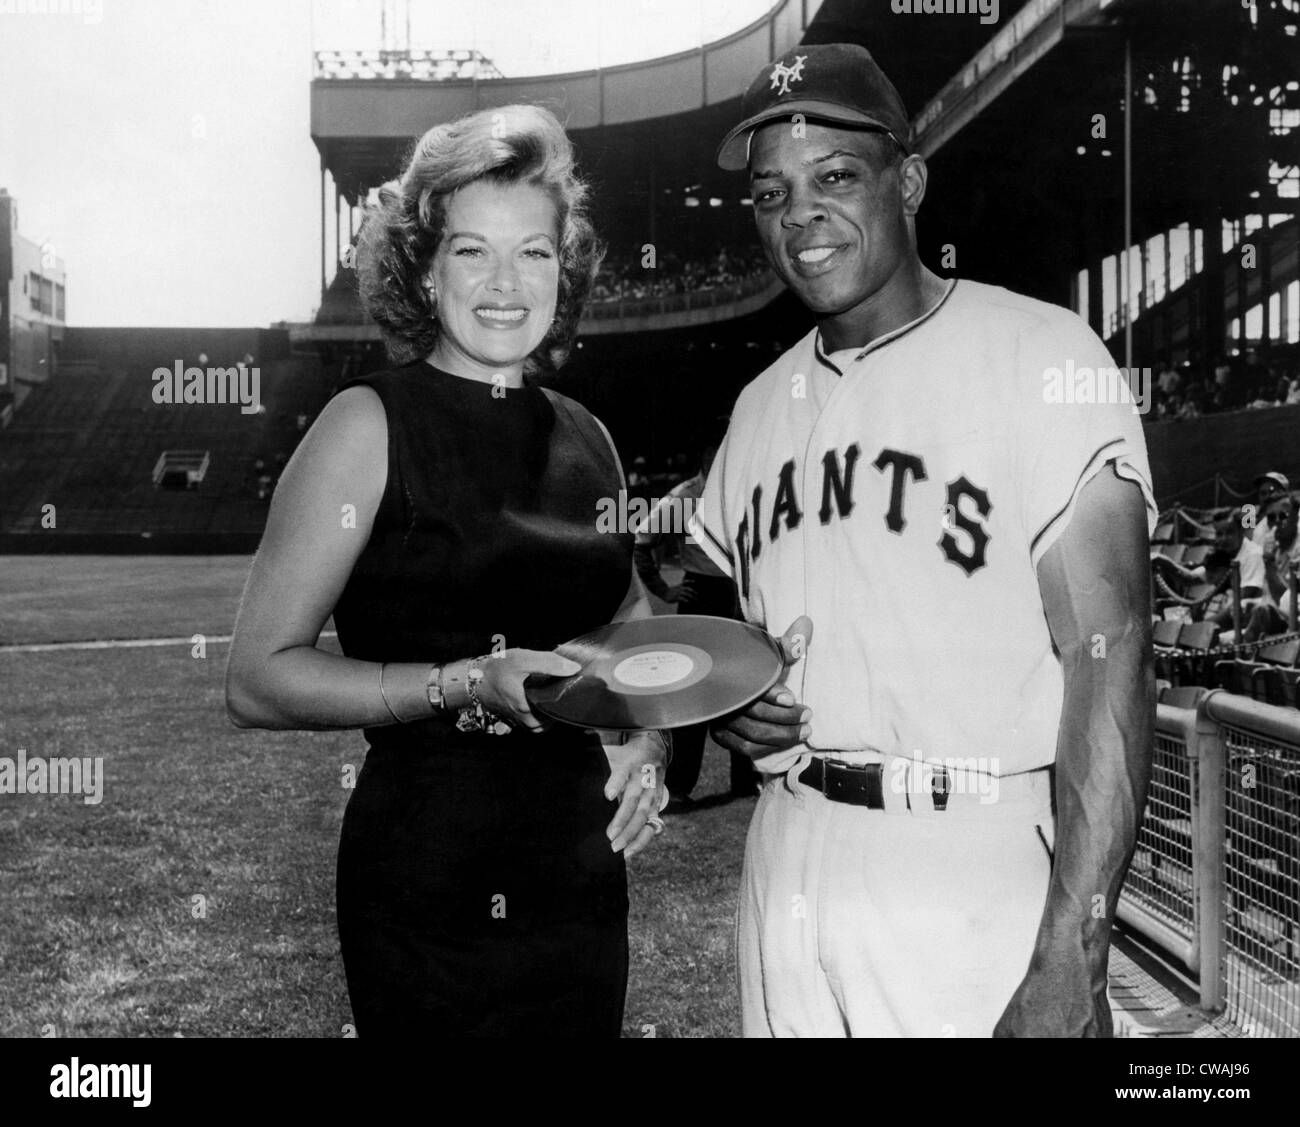 Actress Janis Paige, New York Giants baseball player Willie Mays, 1954.. Courtesy: CSU Archives / Everett Collection Stock Photo